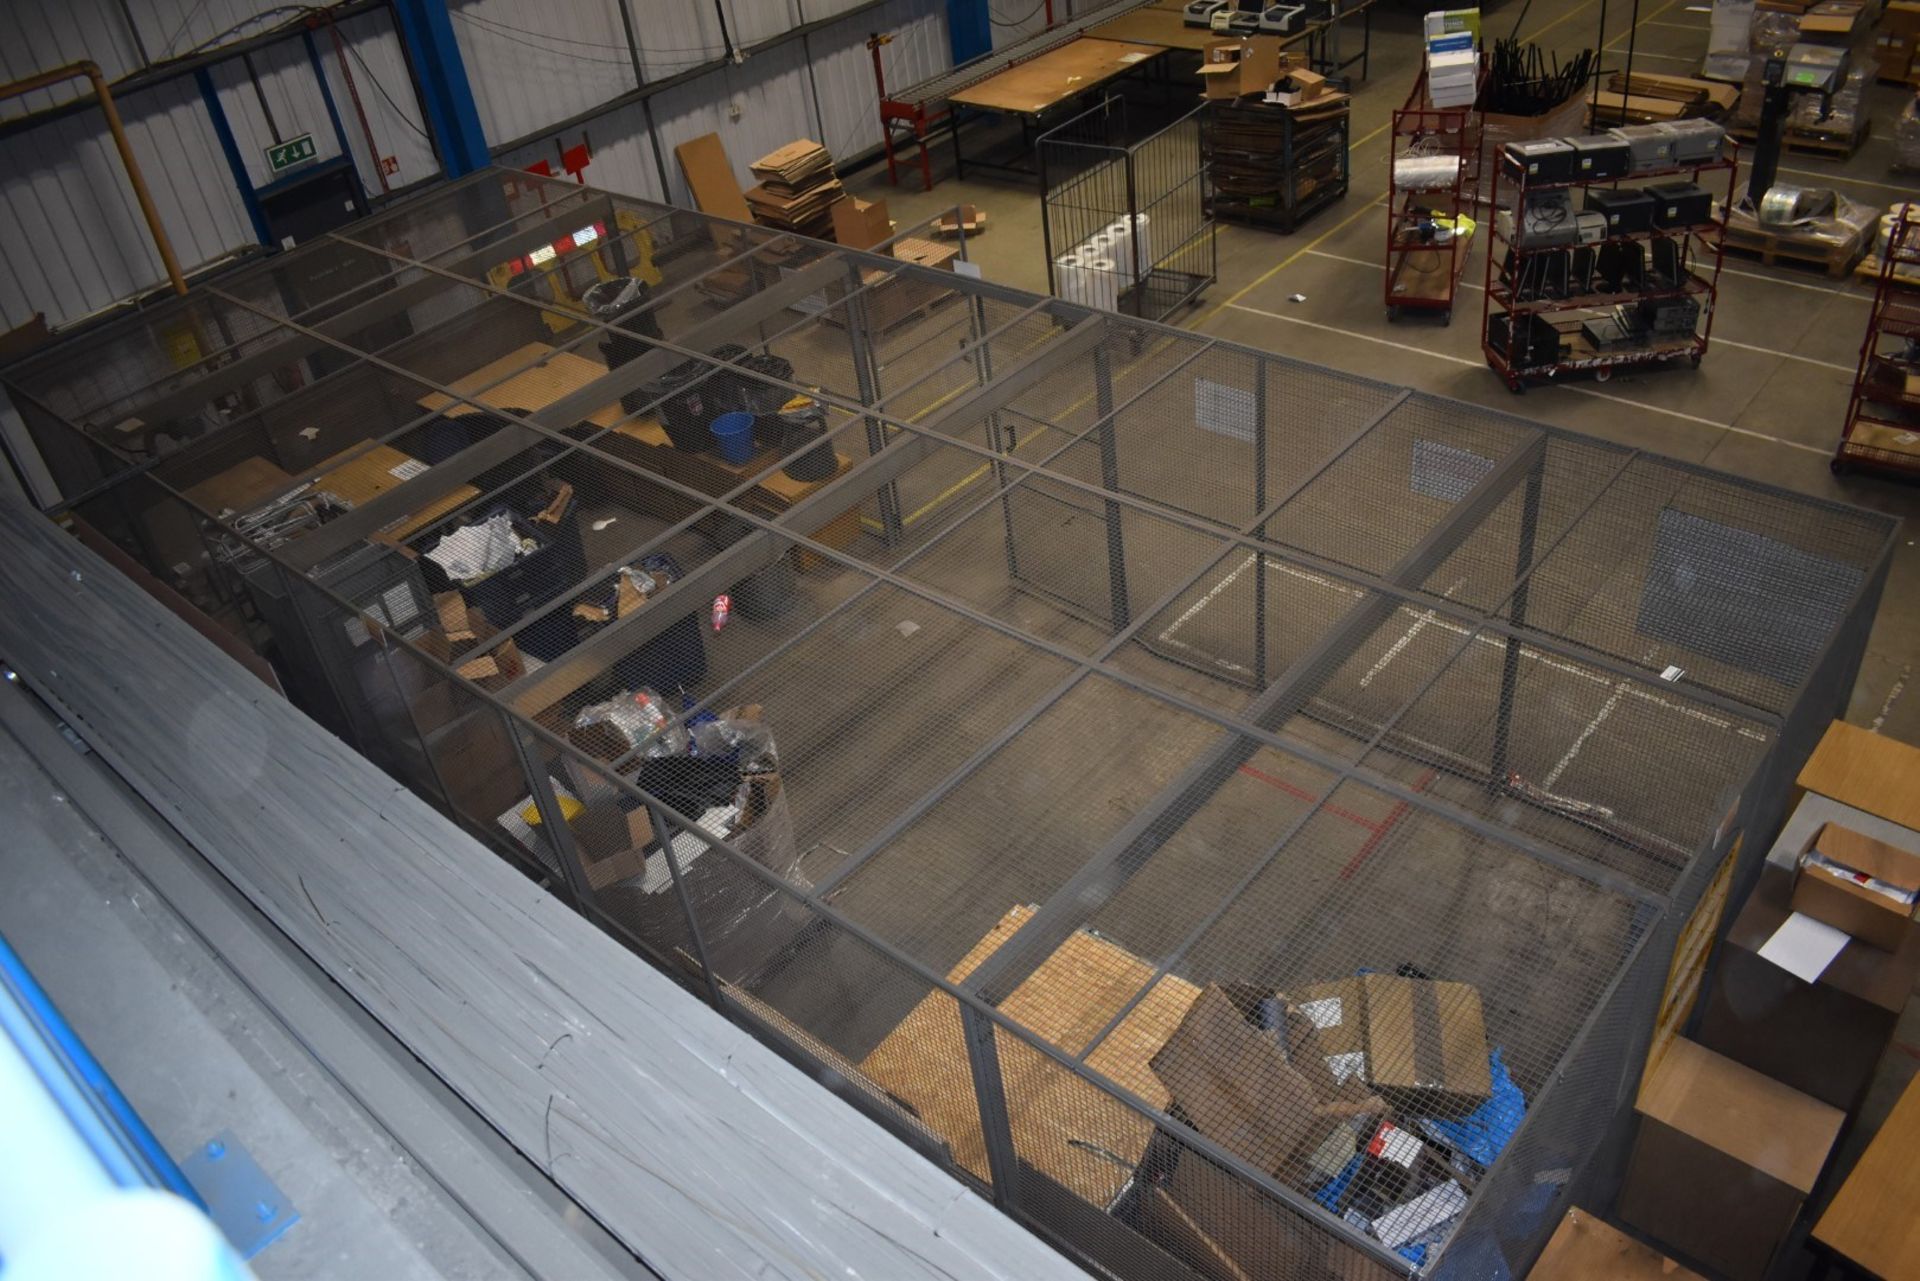 1 x Security Cage Enclosure For Warehouses - Ideal For Storing High-Value Stock or Hazardous Goods - - Image 8 of 12